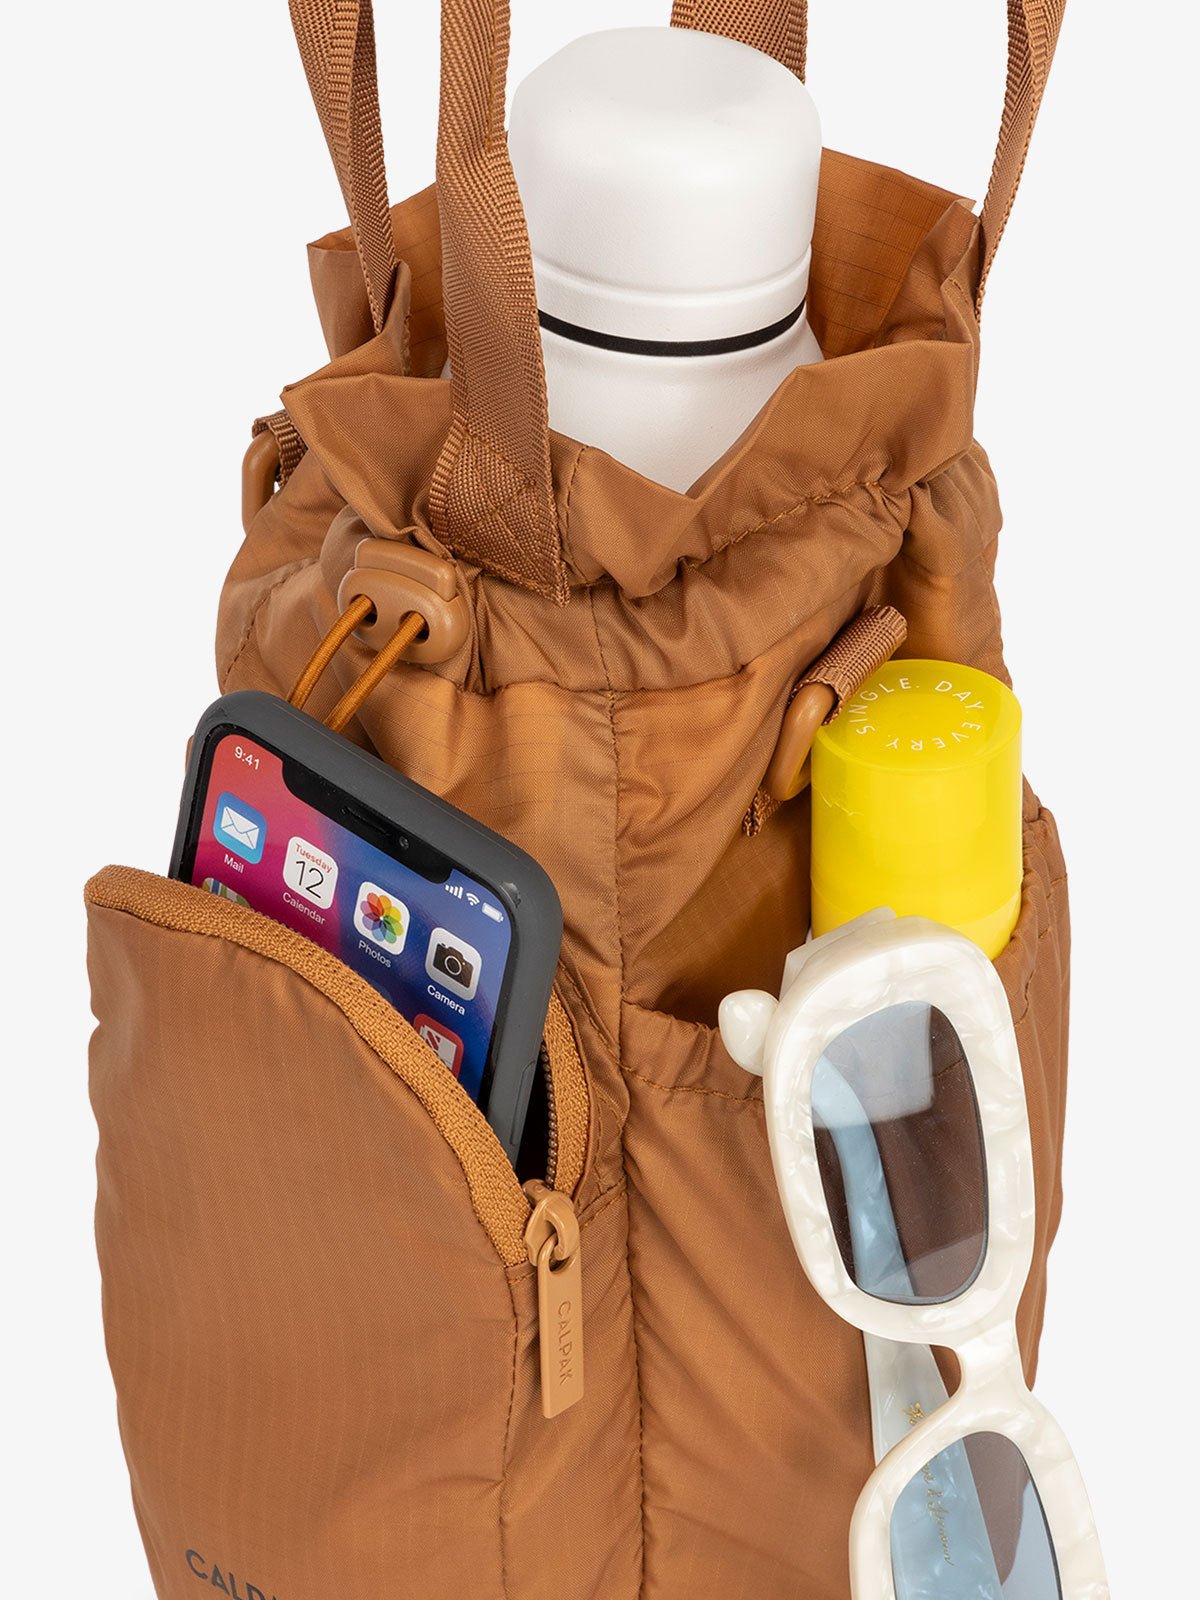 CALPAK Water Bottle carrier with zippered pocket in brown